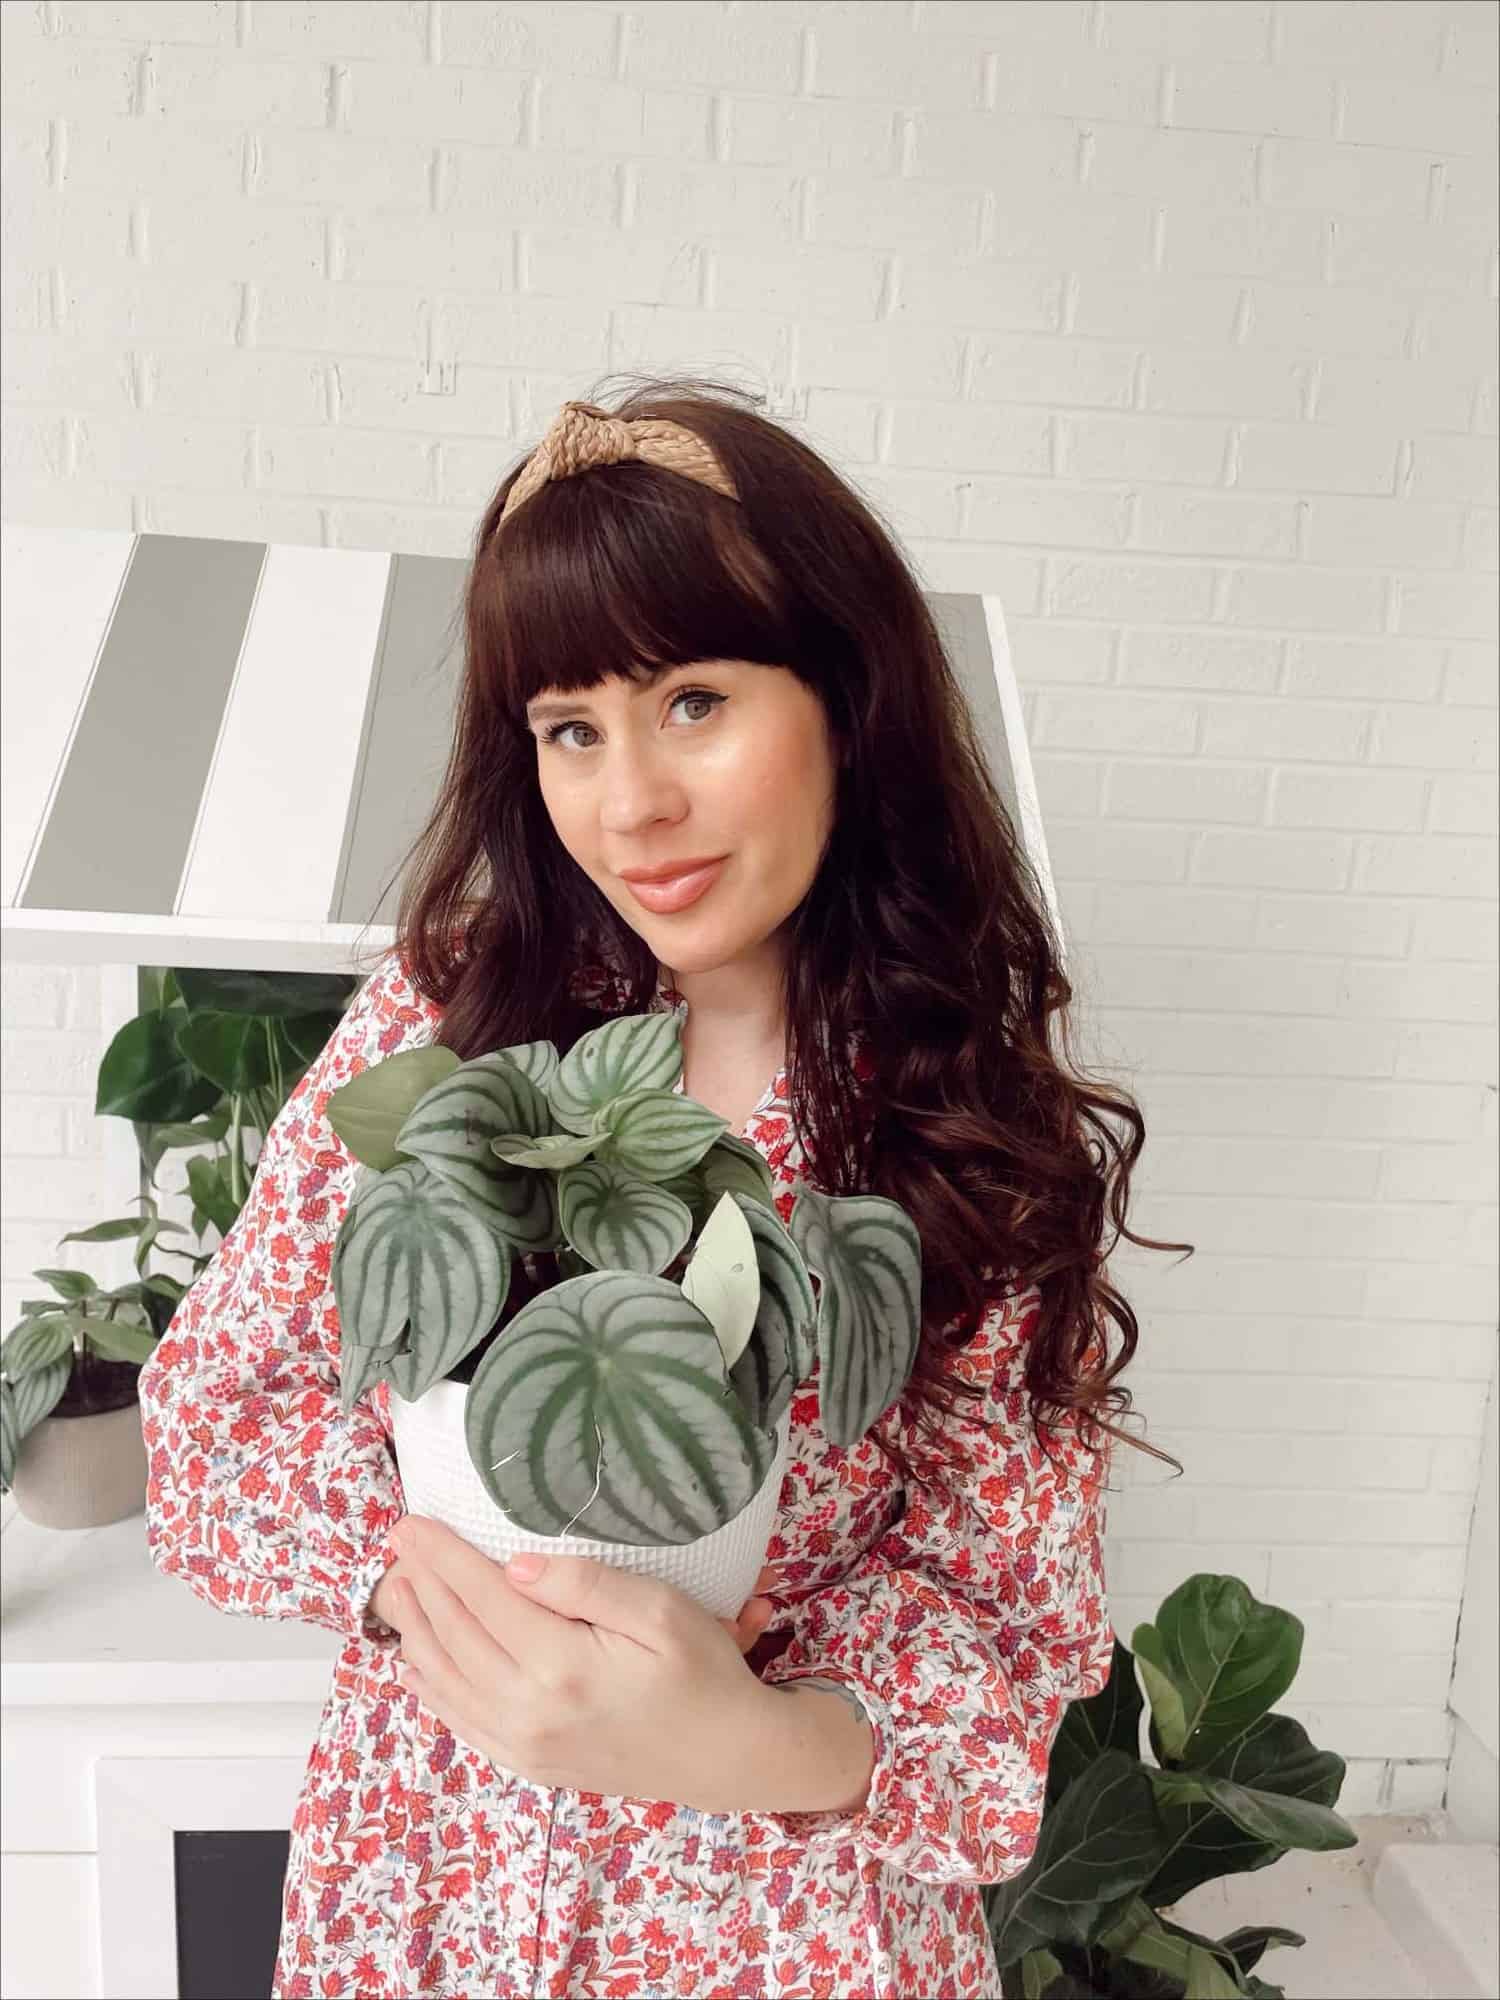 Woman wearing floral dress holding a potted plant